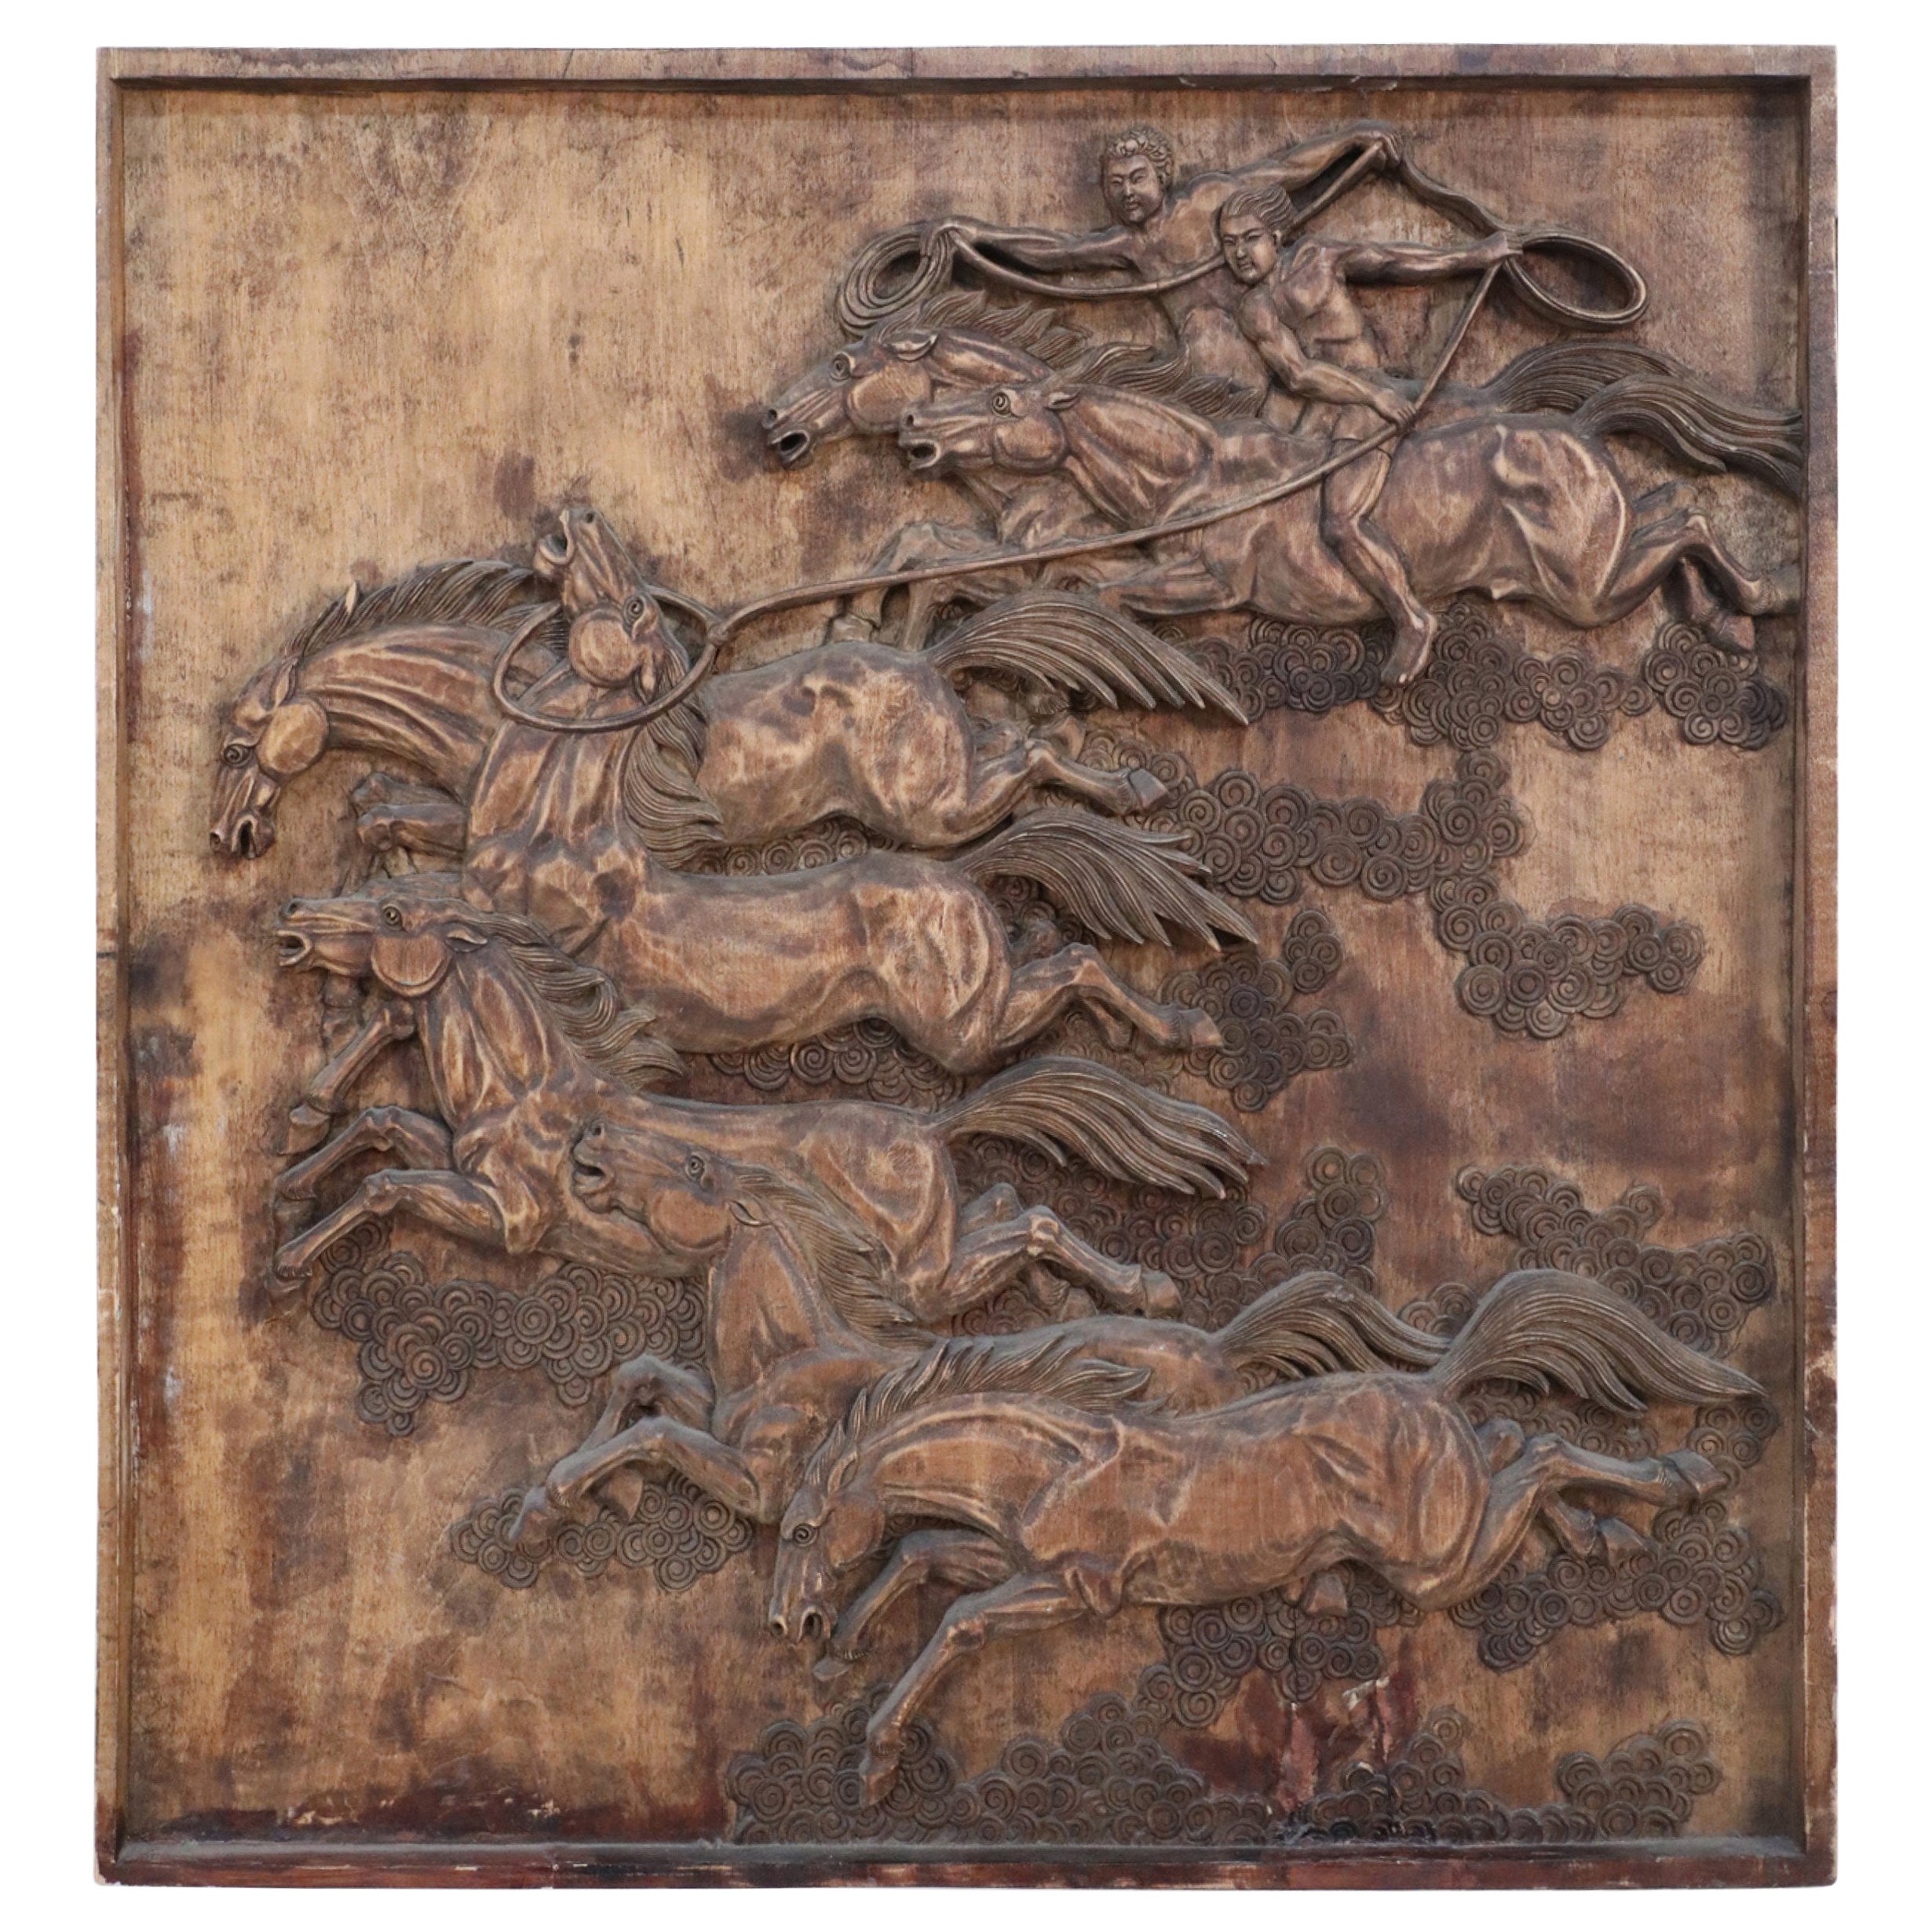 Chinese Carved Wooden Wall Plaque Depicting Riders on Horseback For Sale